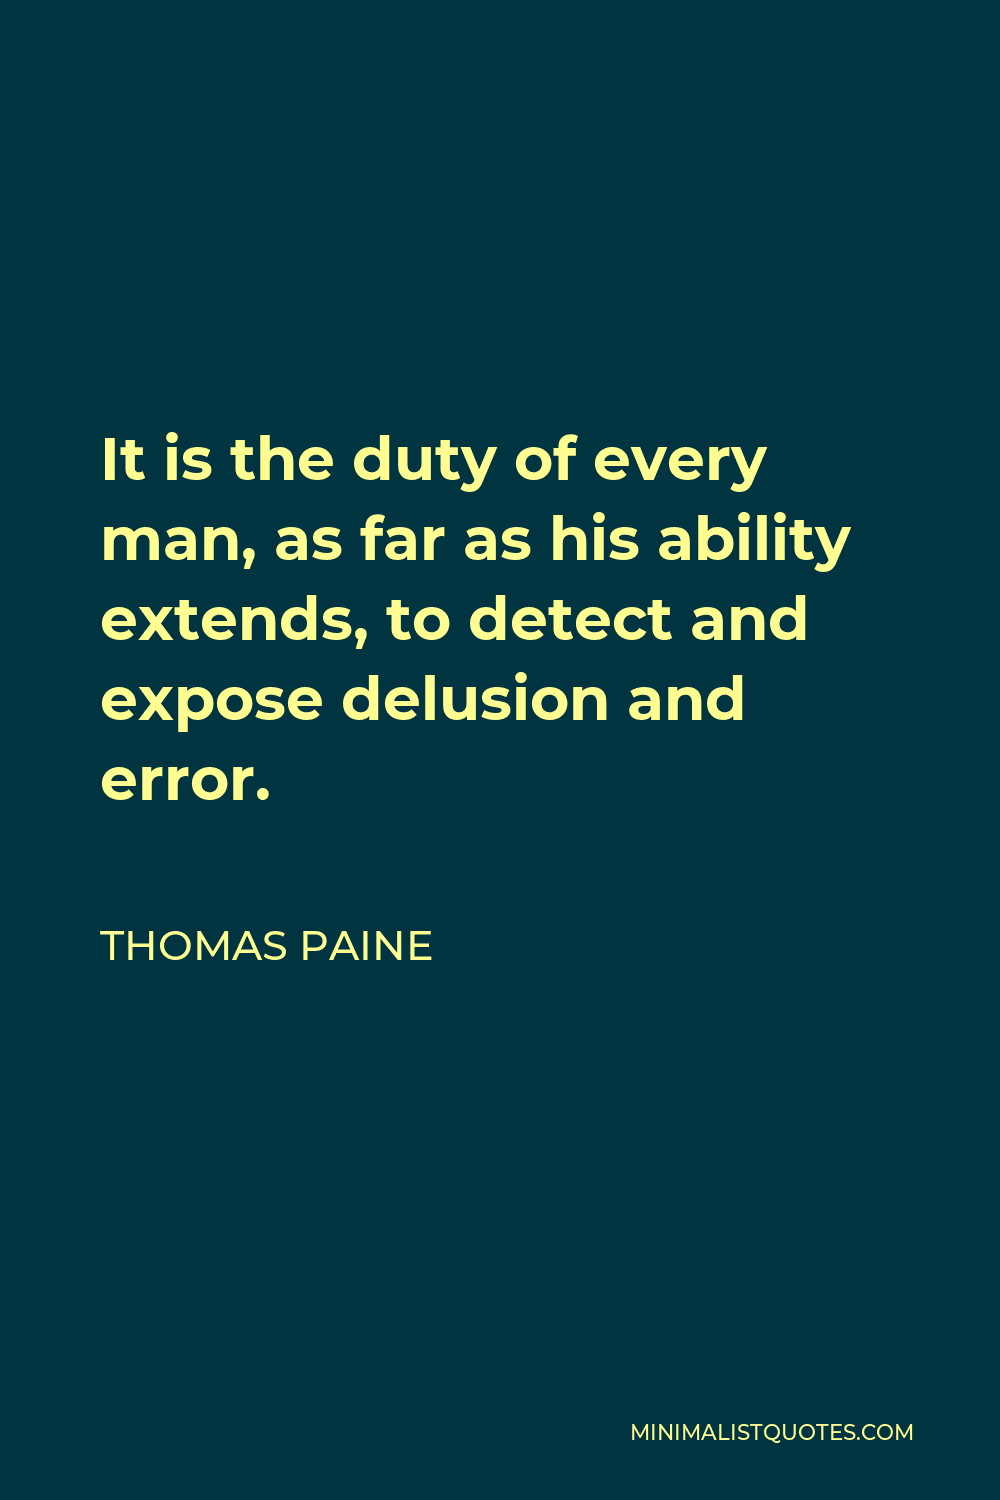 Thomas Paine Quote - It is the duty of every man, as far as his ability extends, to detect and expose delusion and error.